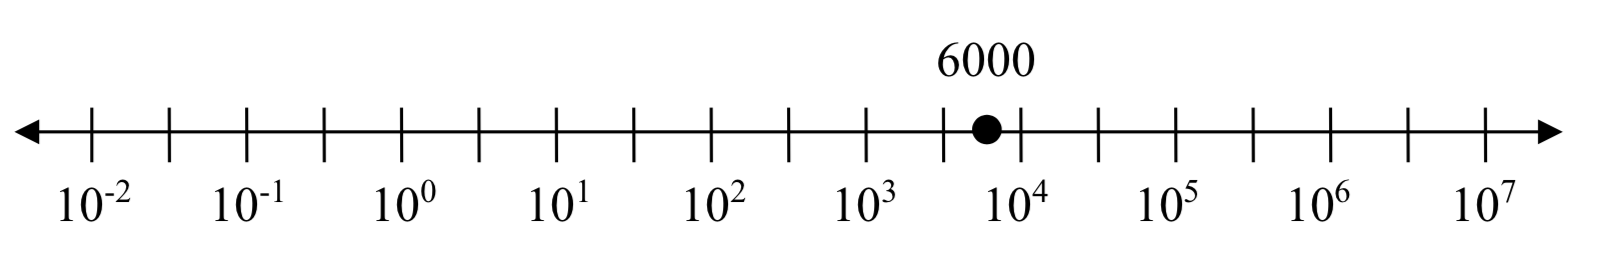 A numberline with equally spaced ticks labeled 10 to the negative 2, 10 to the negative 1, 10 to the zero, 10 to the 1, 10 to the 2, and so on up to 10 to the 7.  There is a point labeled 6000 placed partway between 10 to the 3.5 and 10 to the 4.